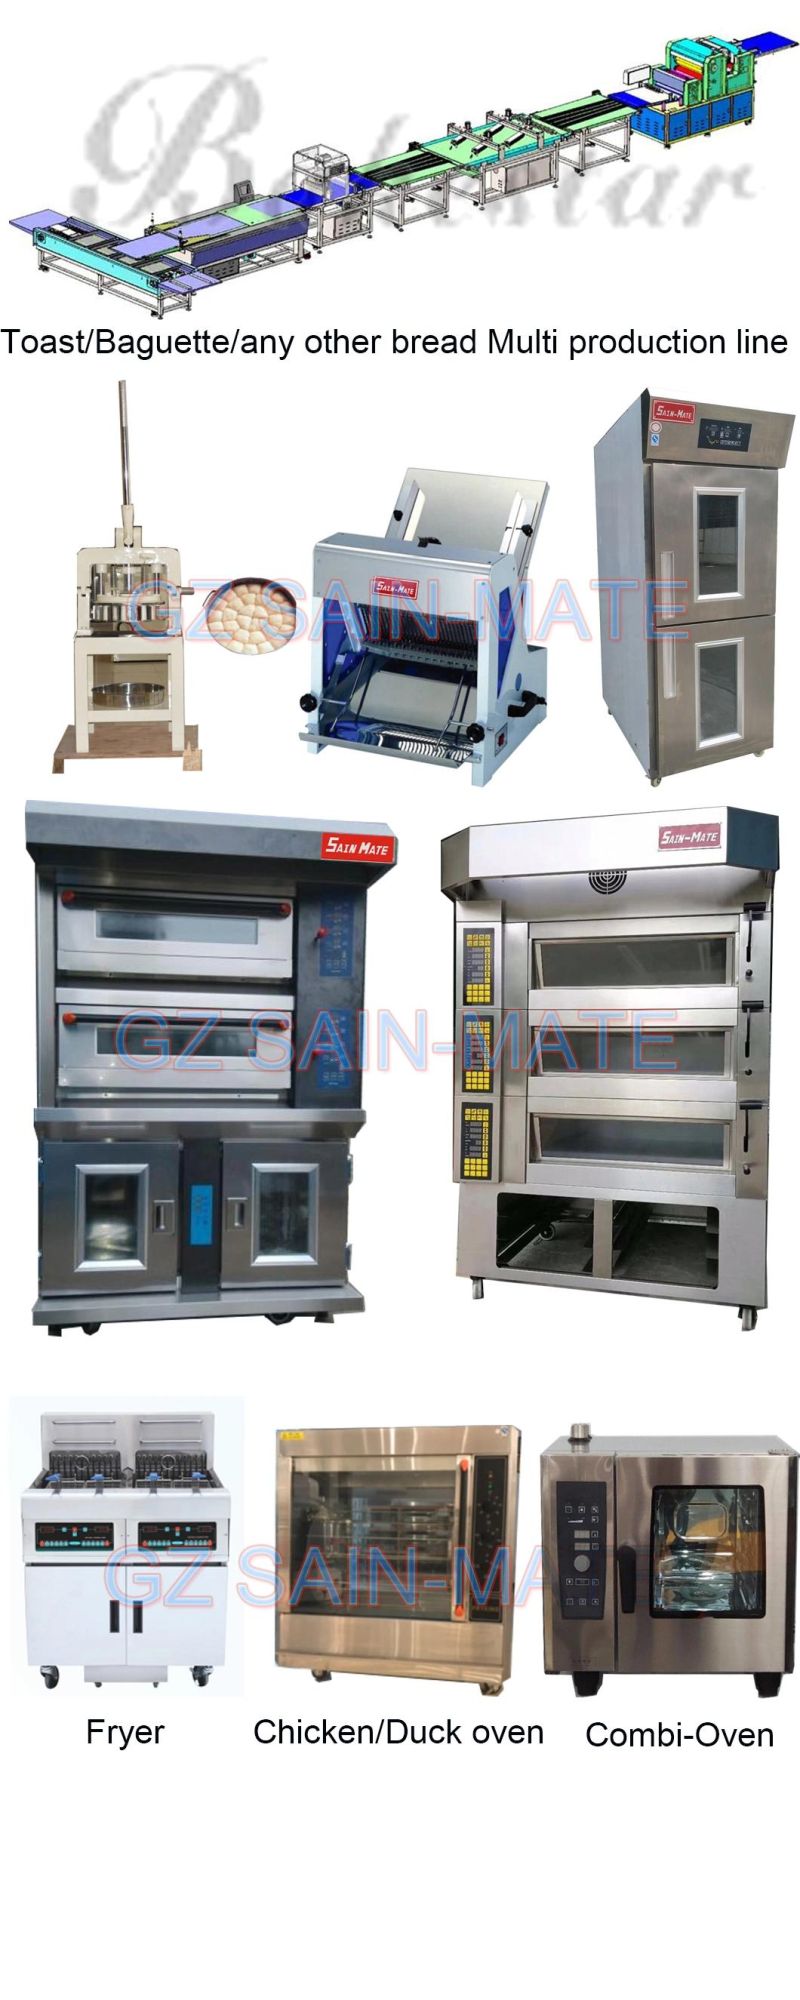 Hot Sale 2019 Baking Cookies Bakery Rotary Rack Ovens for Sale, Cookies Making Oven 64 32 16 Trays Diesel Rotary Rack Oven